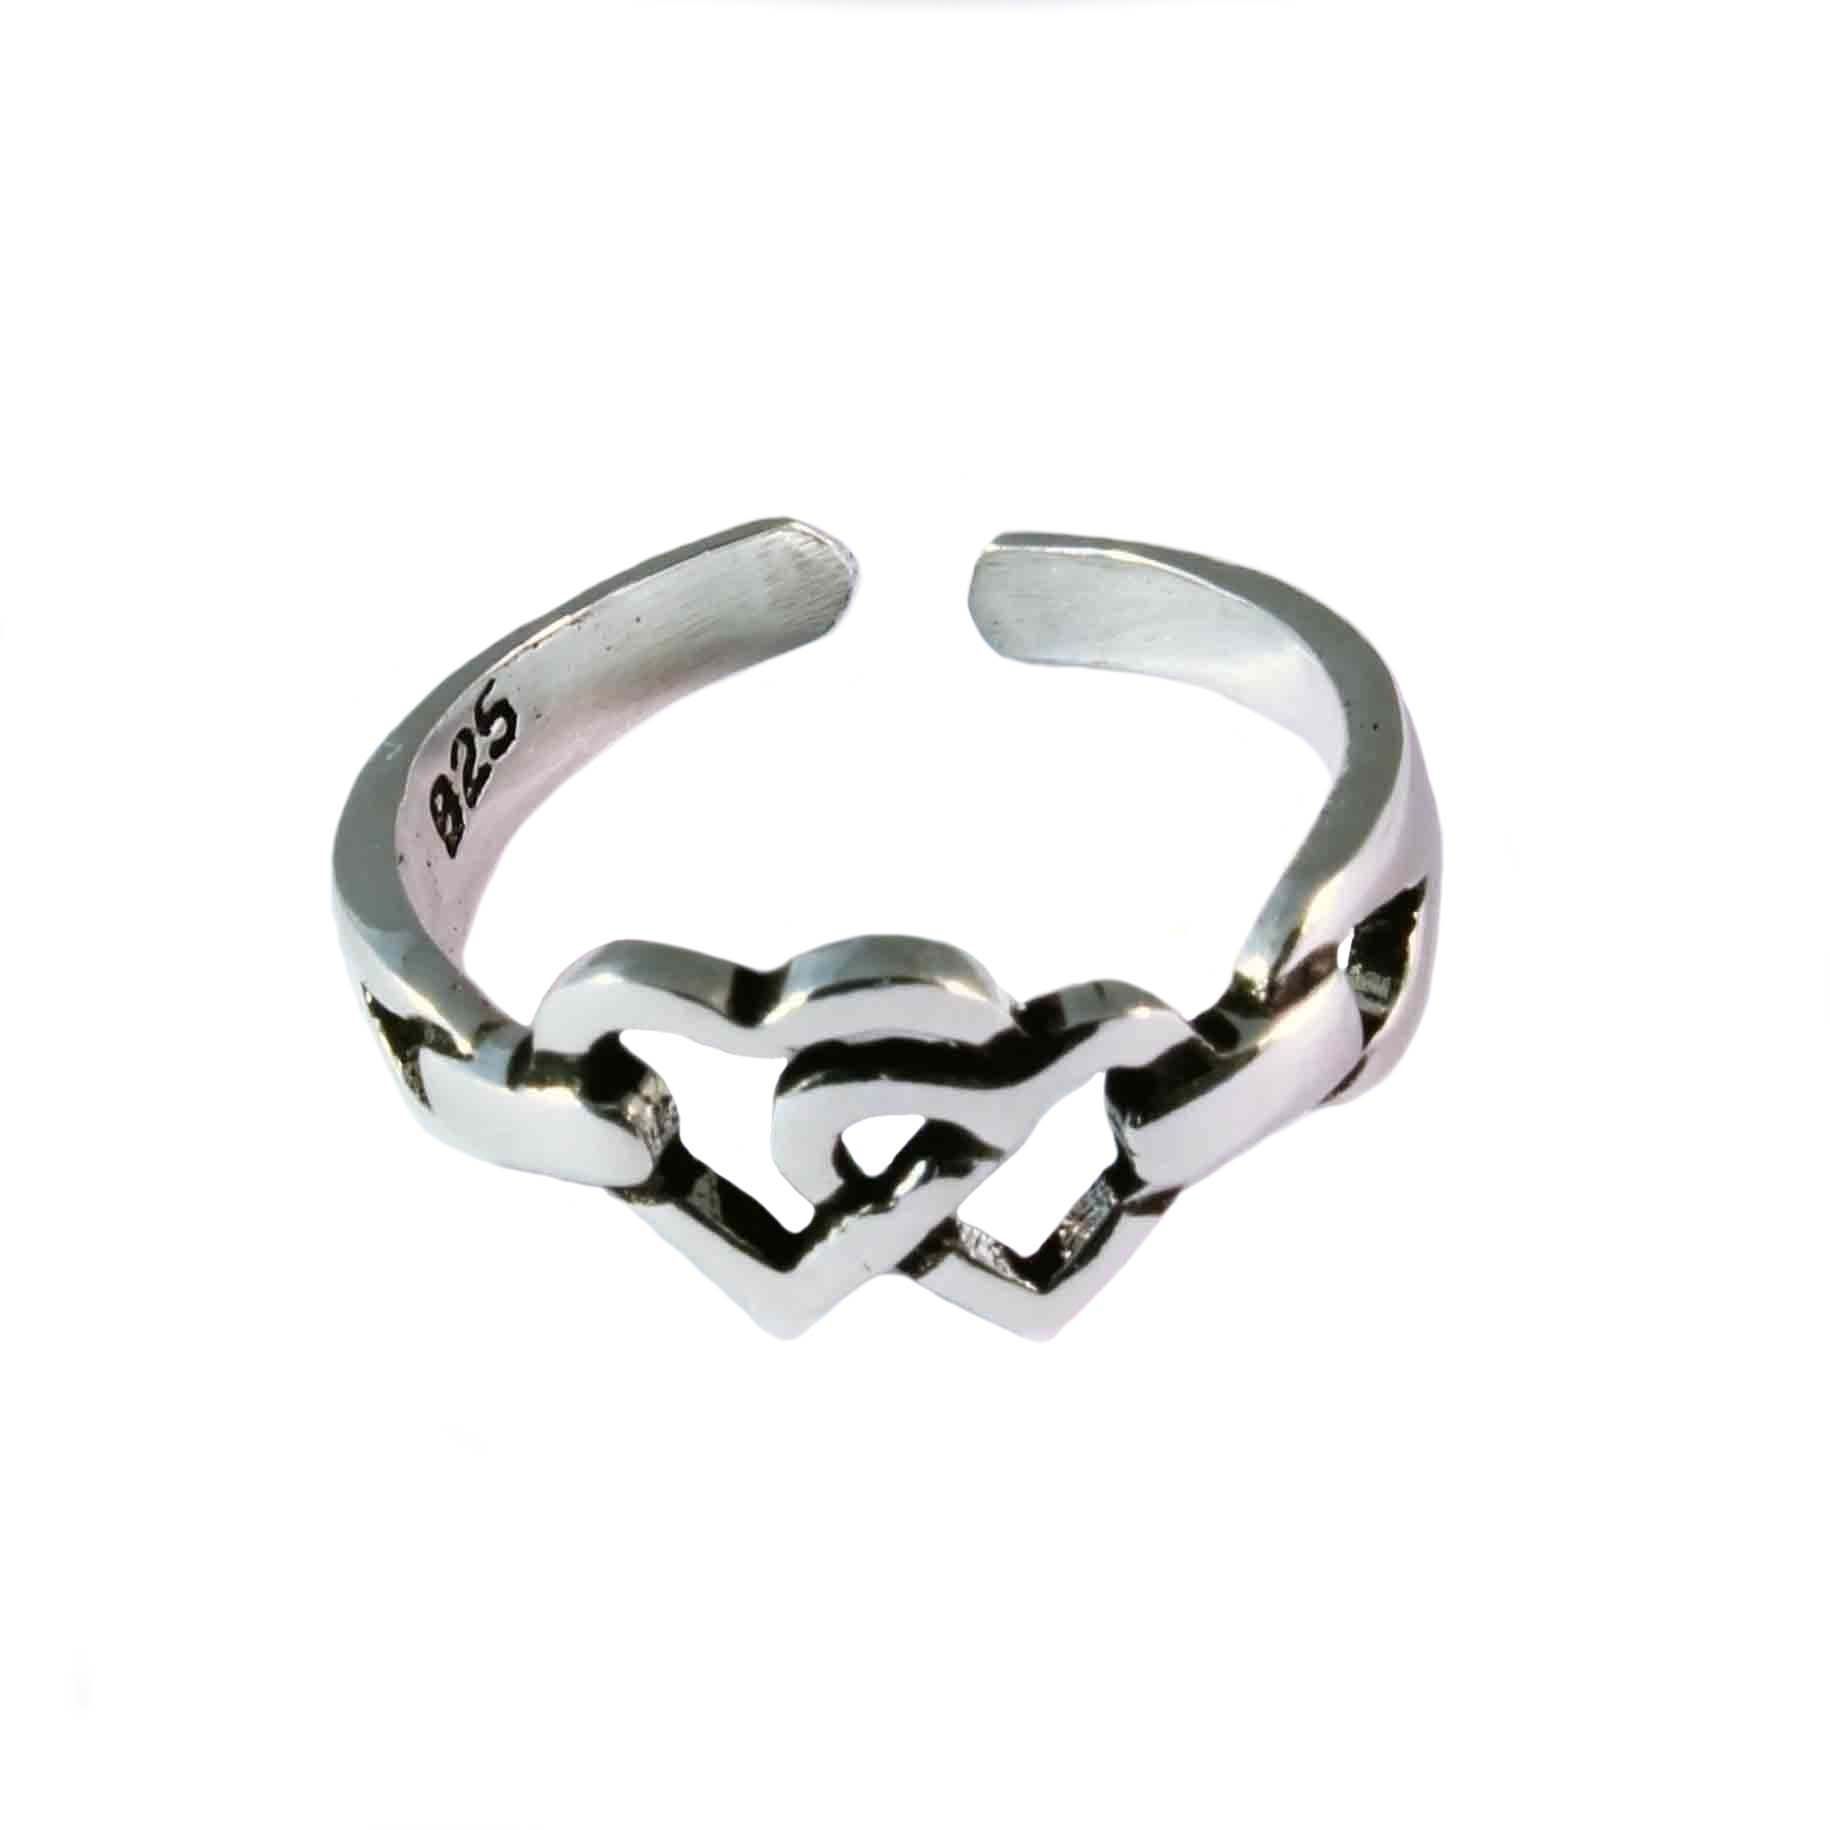 Charm School Uk > Sterling Silver Toe Rings > Entwined Hearts Intended For Current Heart Toe Rings (View 6 of 15)